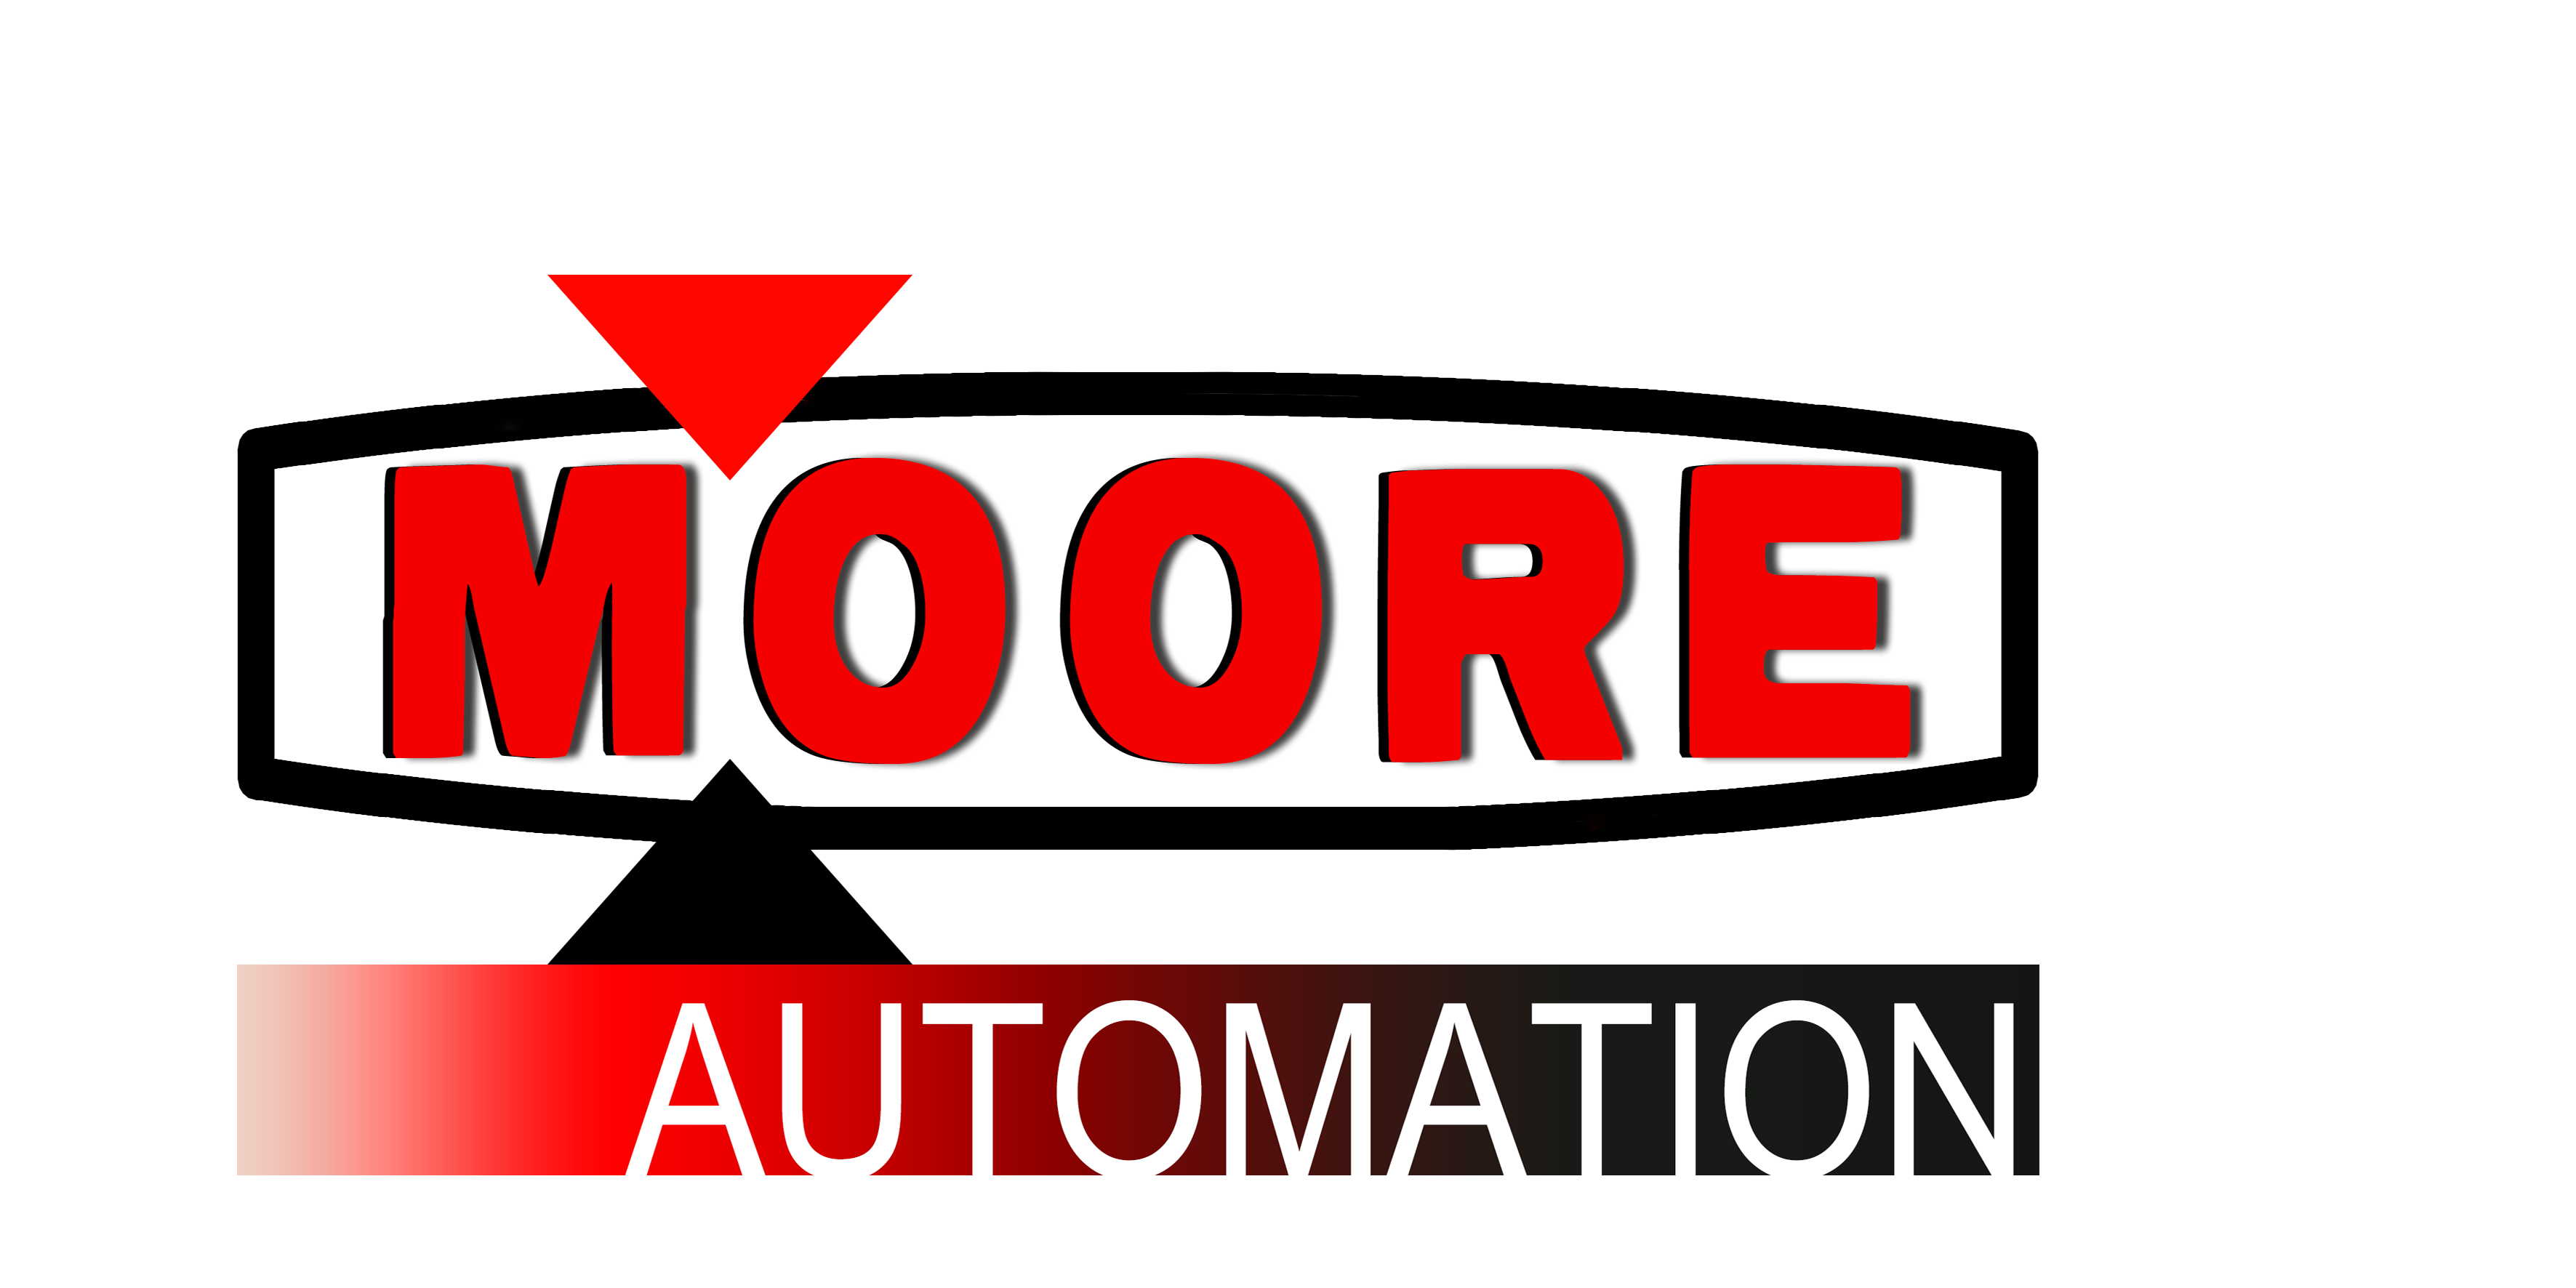 Moore limited